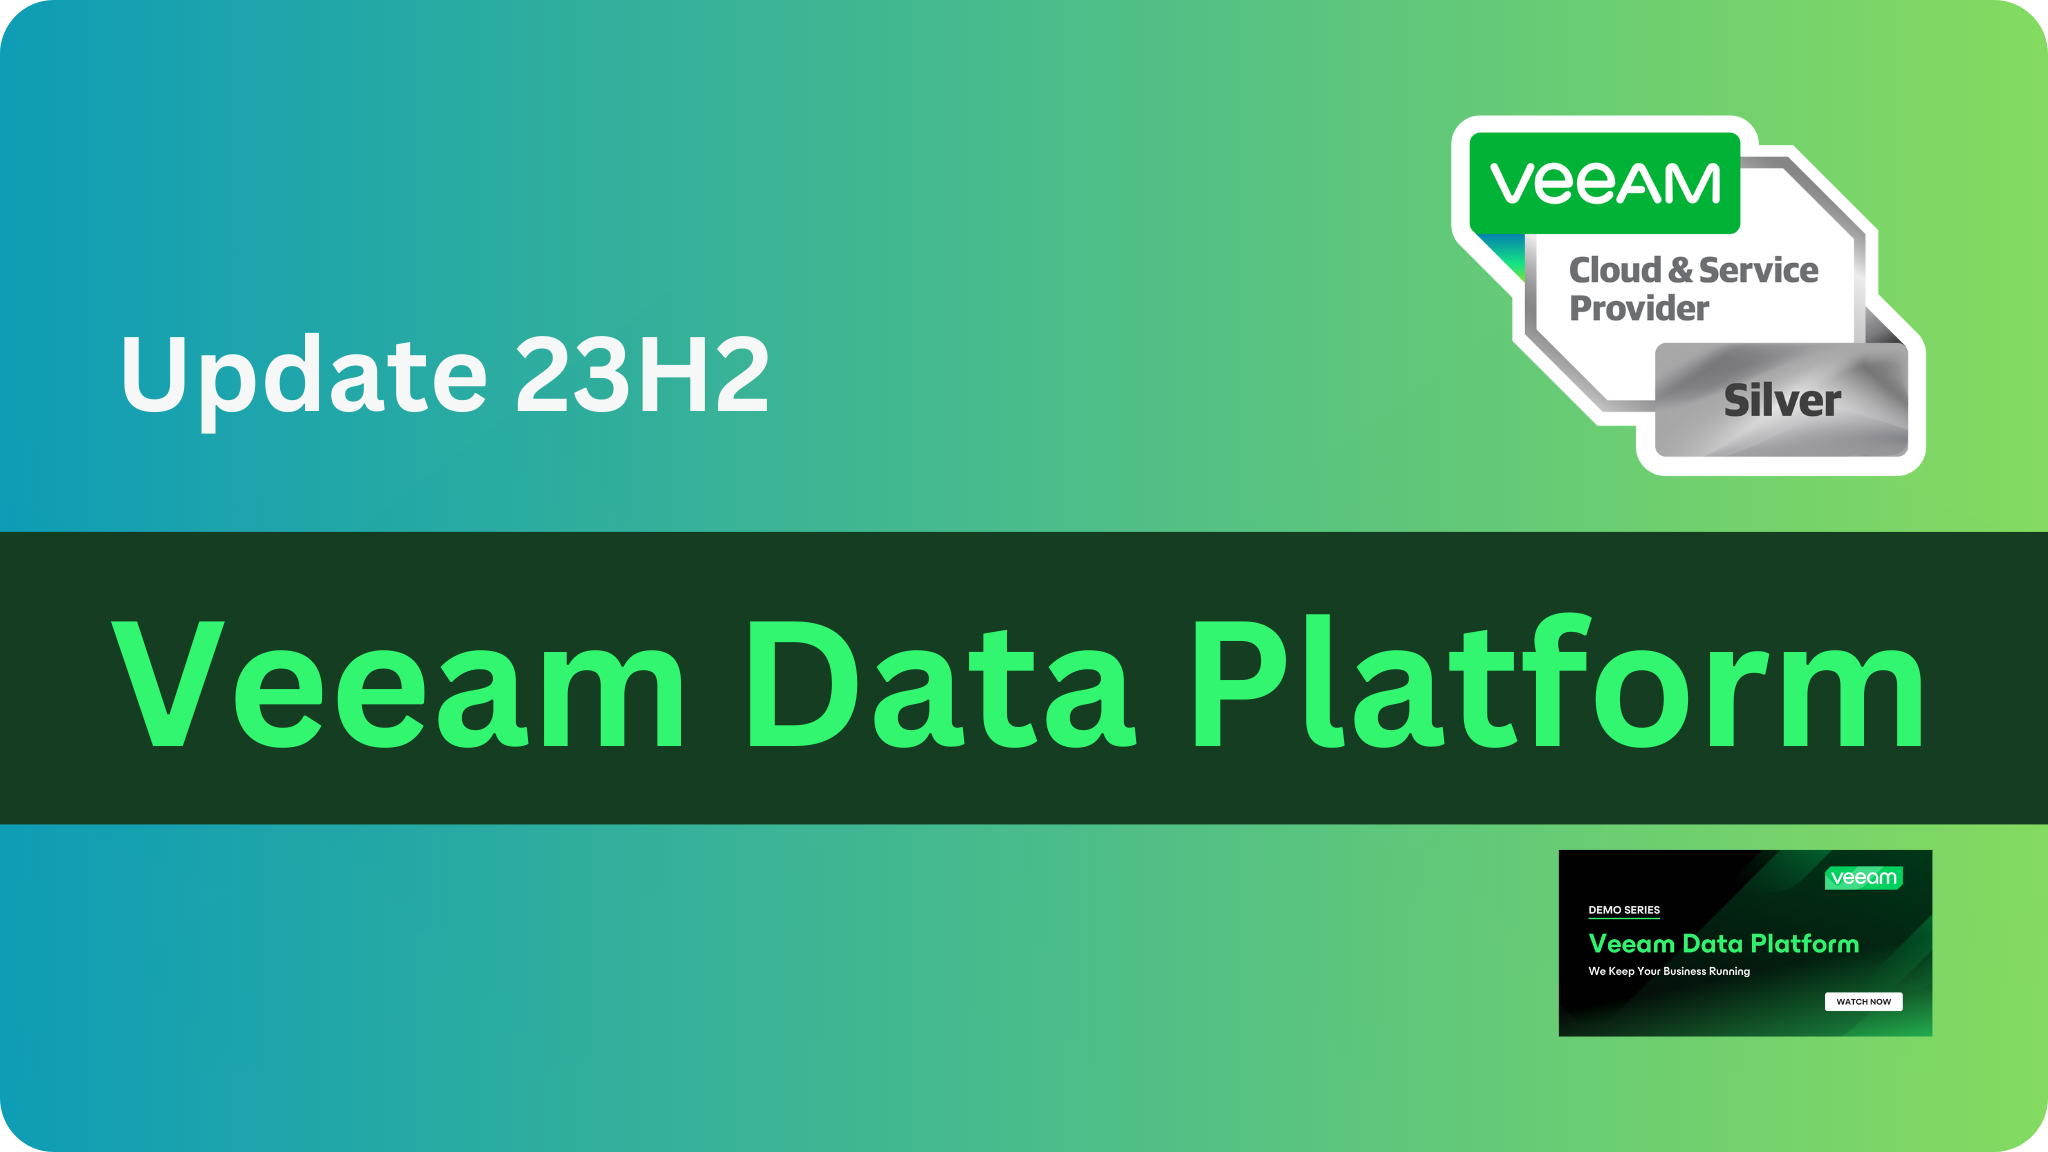 Veeam Backup & Replication v12.1 in the new Data Platform Update 23h2: The 5 most important features at a glance